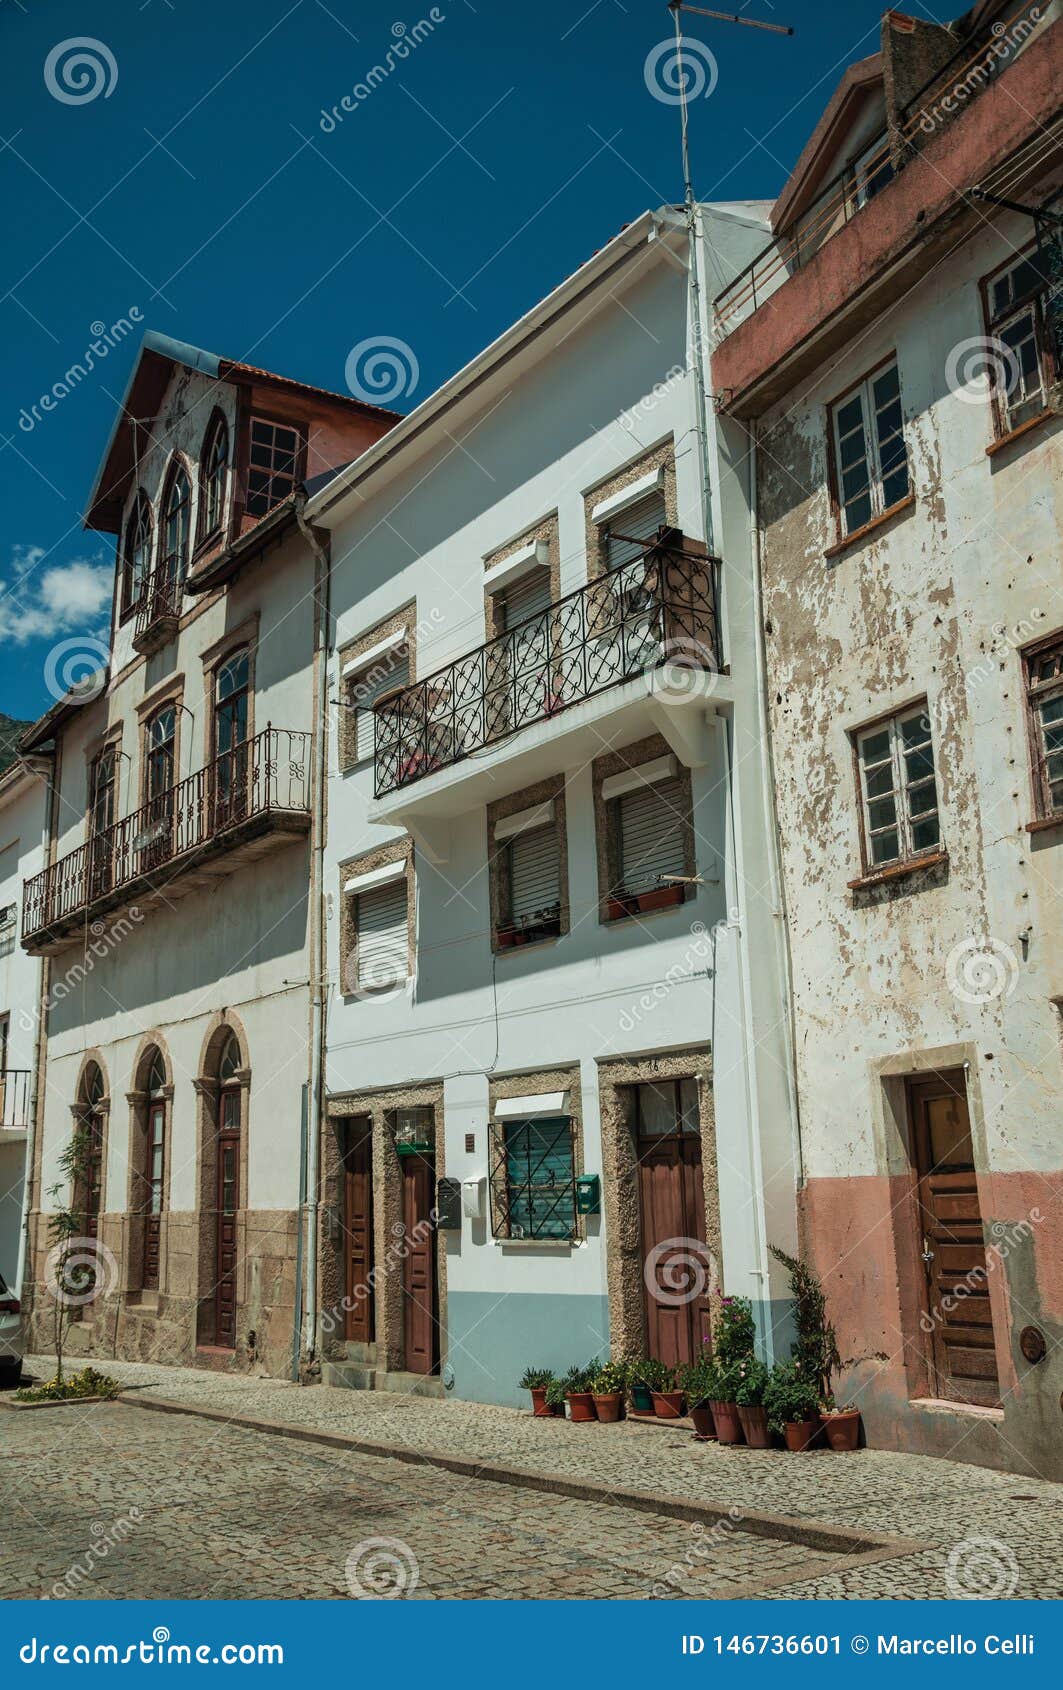 old houses with worn plaster and wooden doors